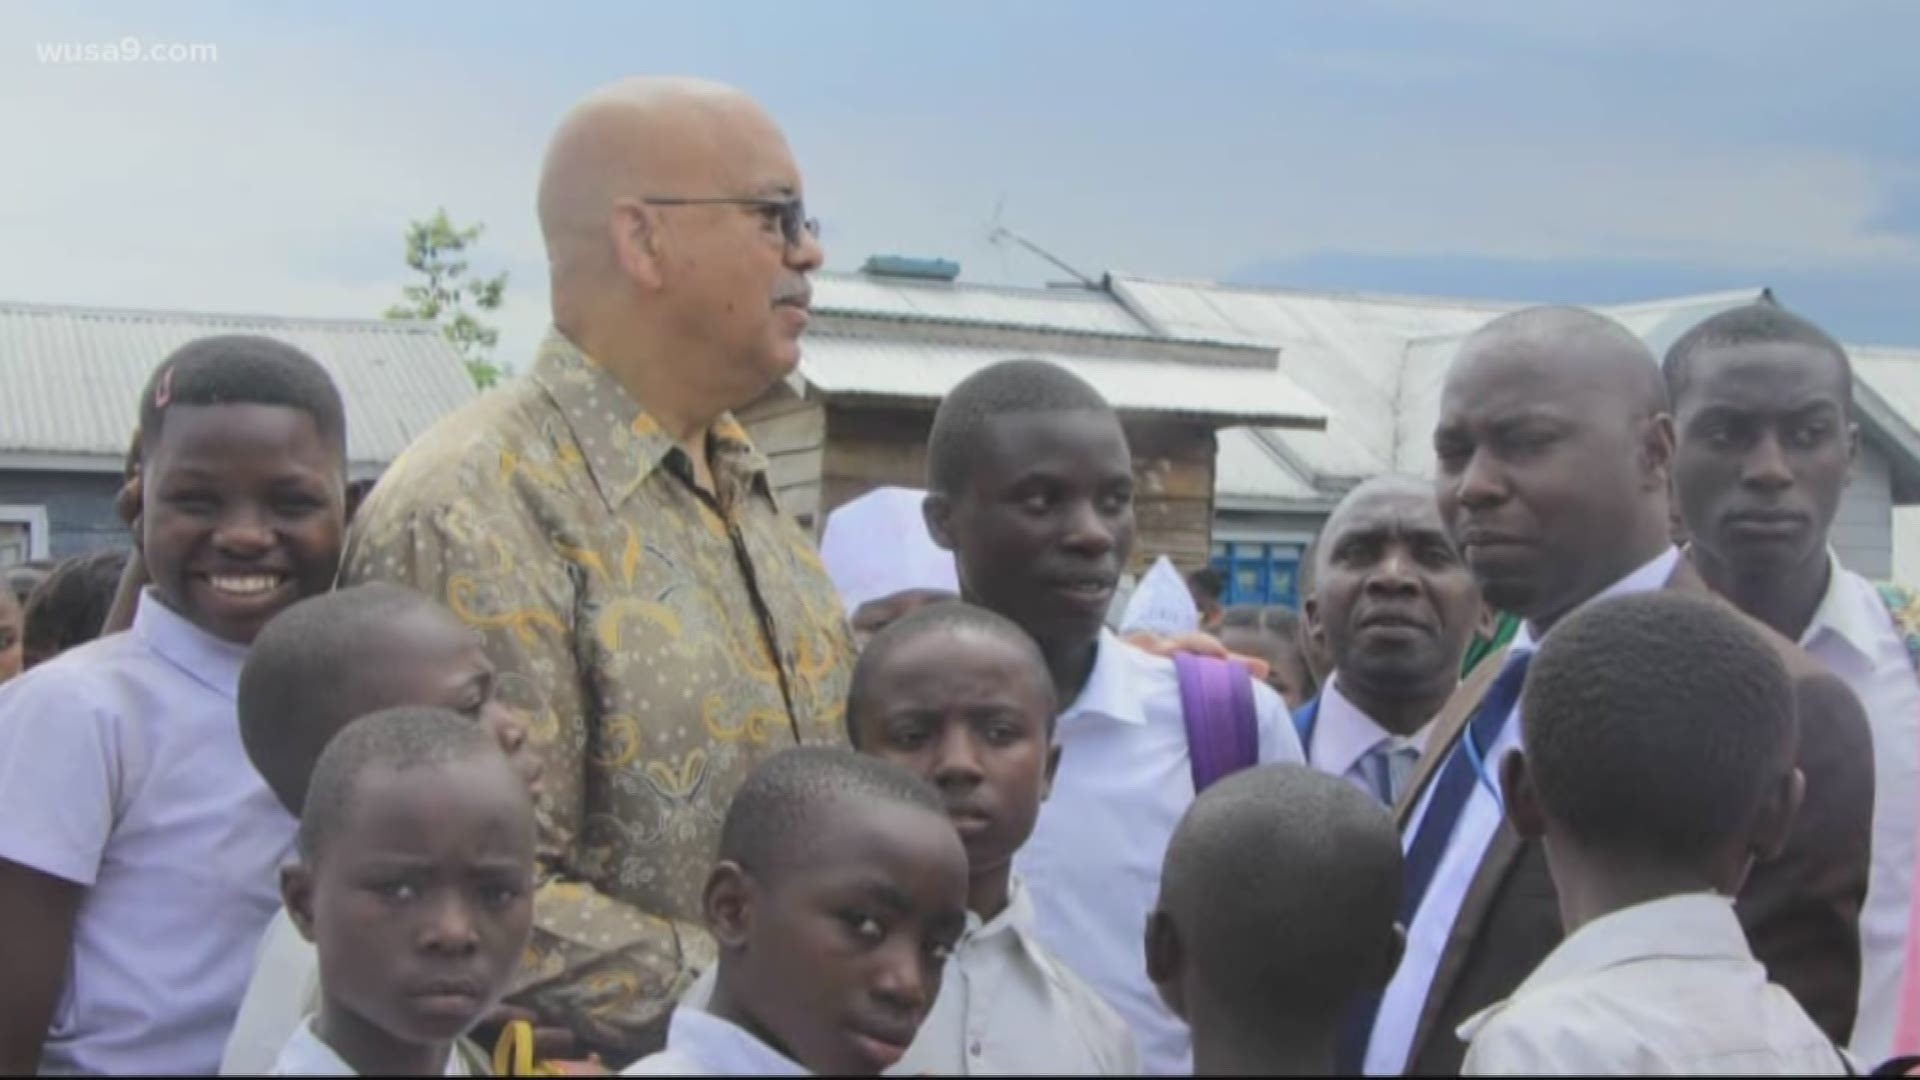 Pastor Weaver is seeking support to help fund the education of hundreds of children at a school named after him in the city of Goma.